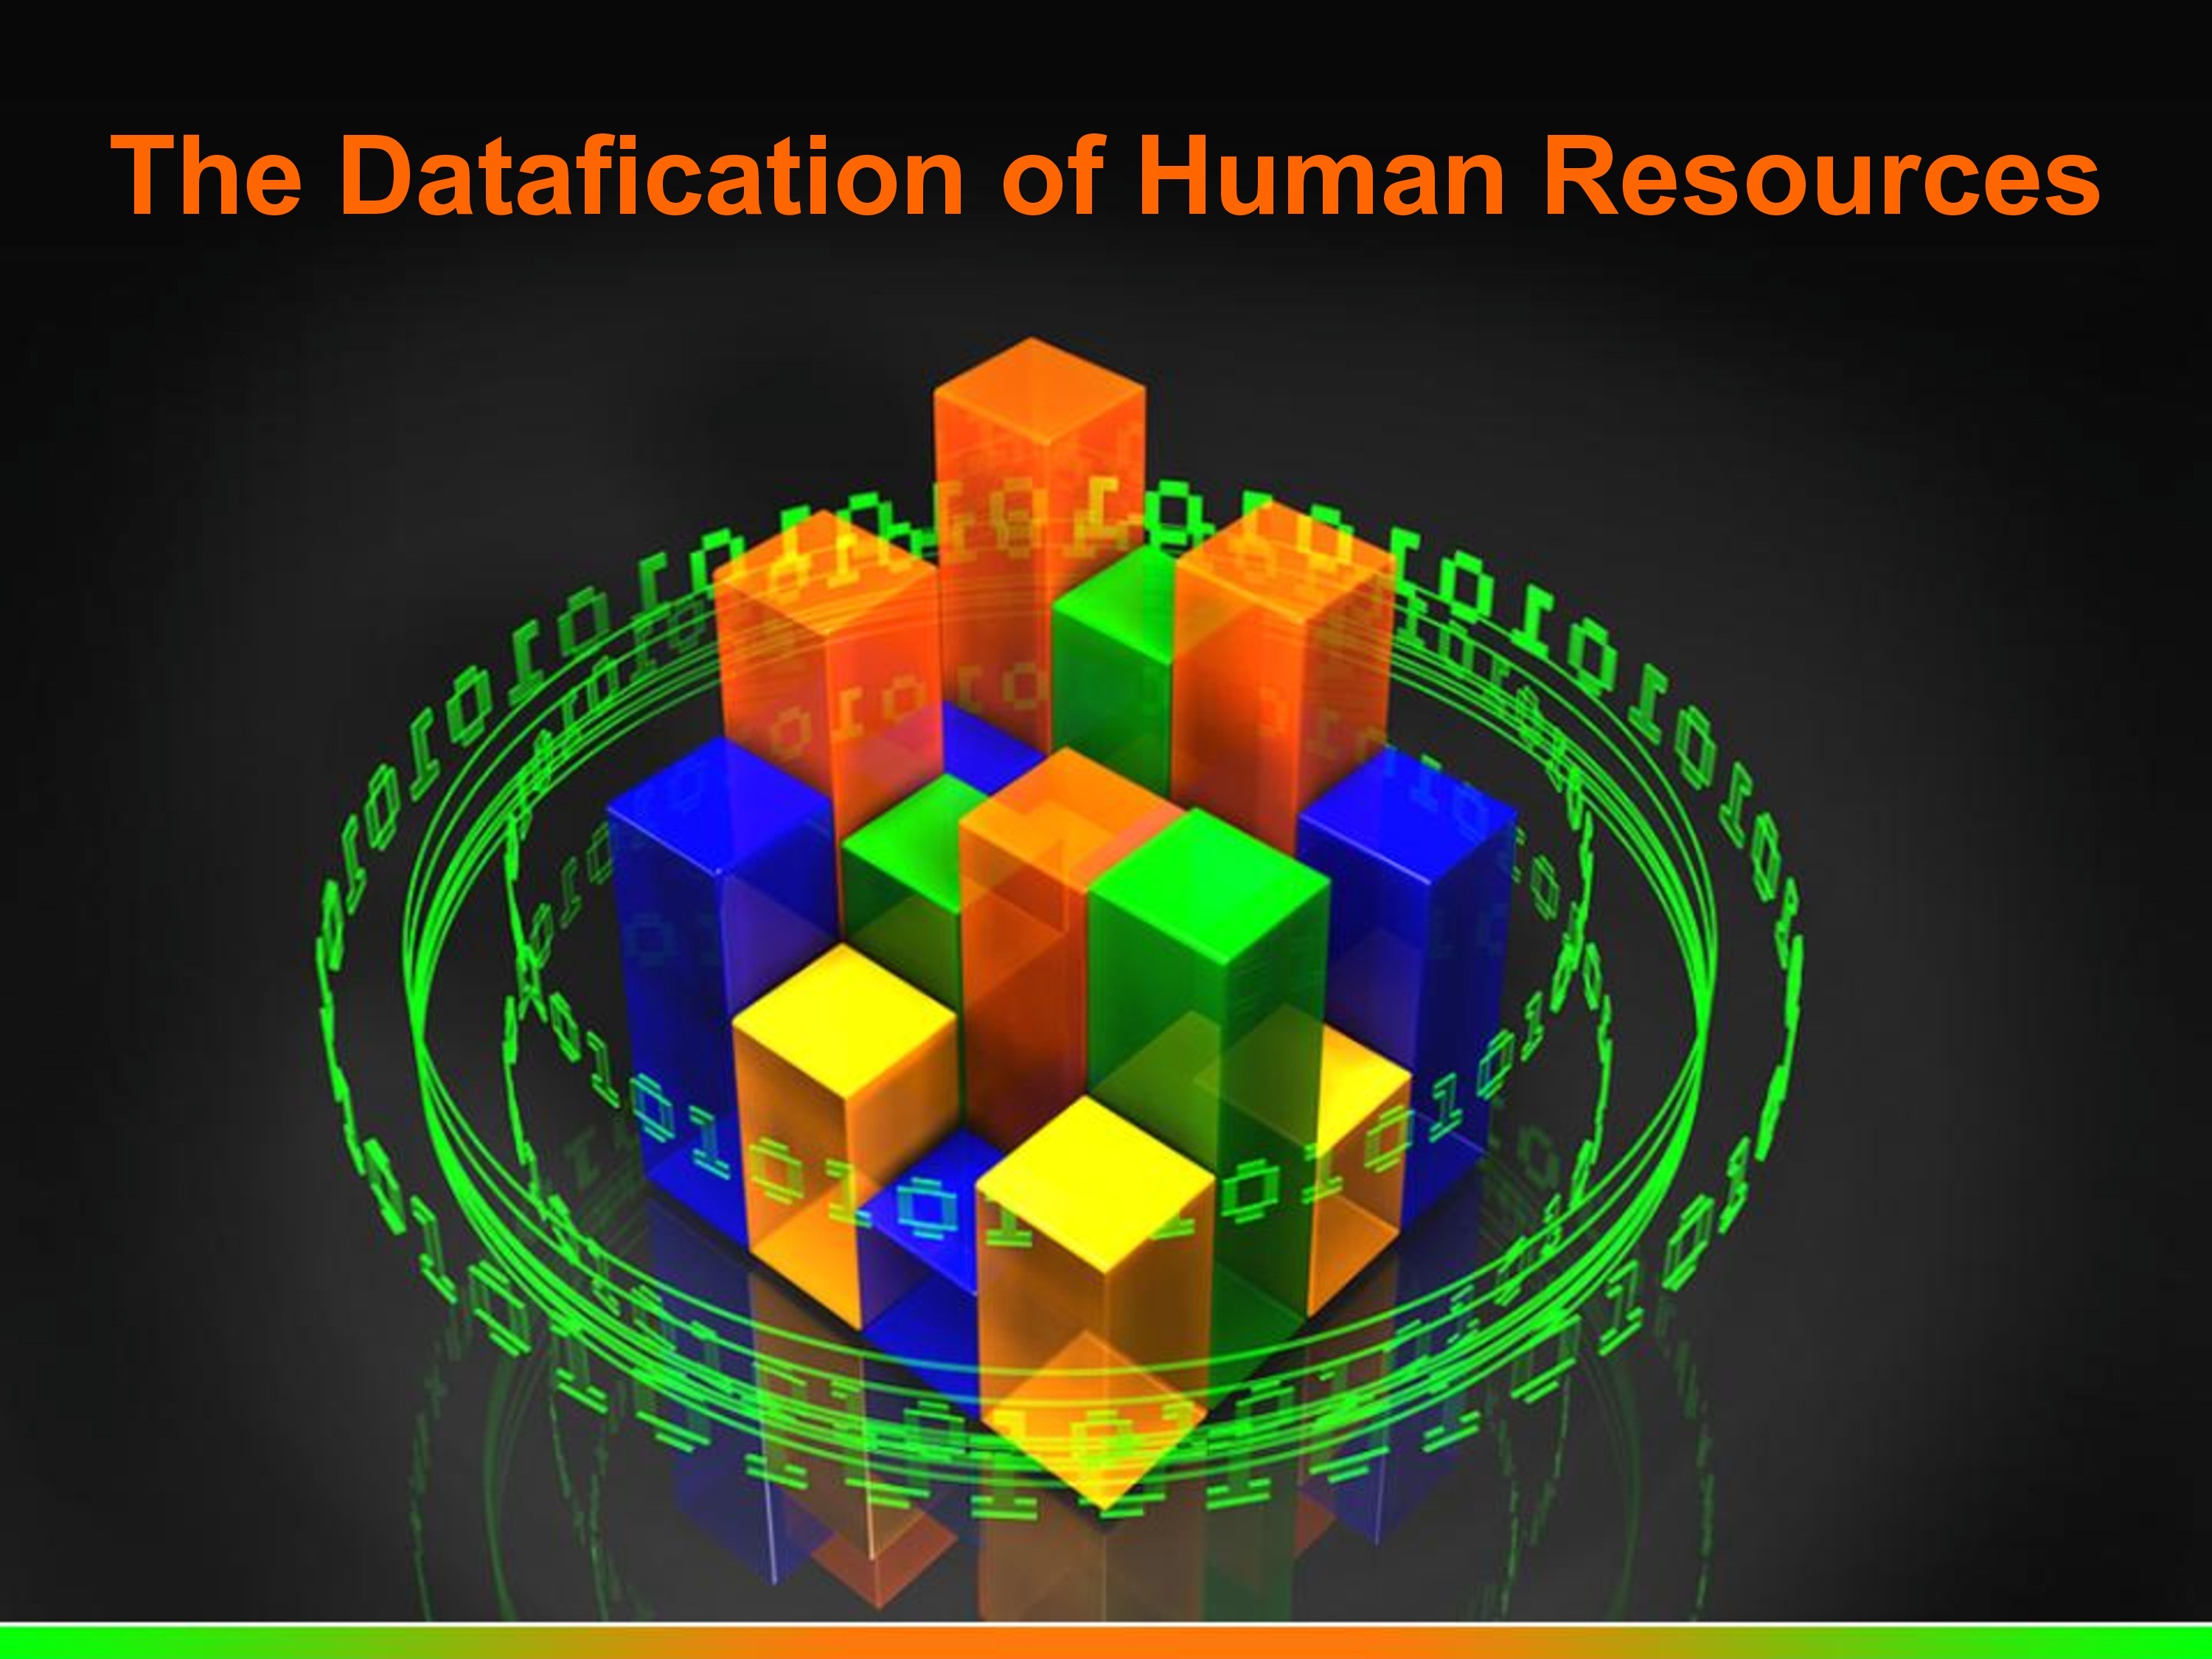 The Datafication of Human Resources